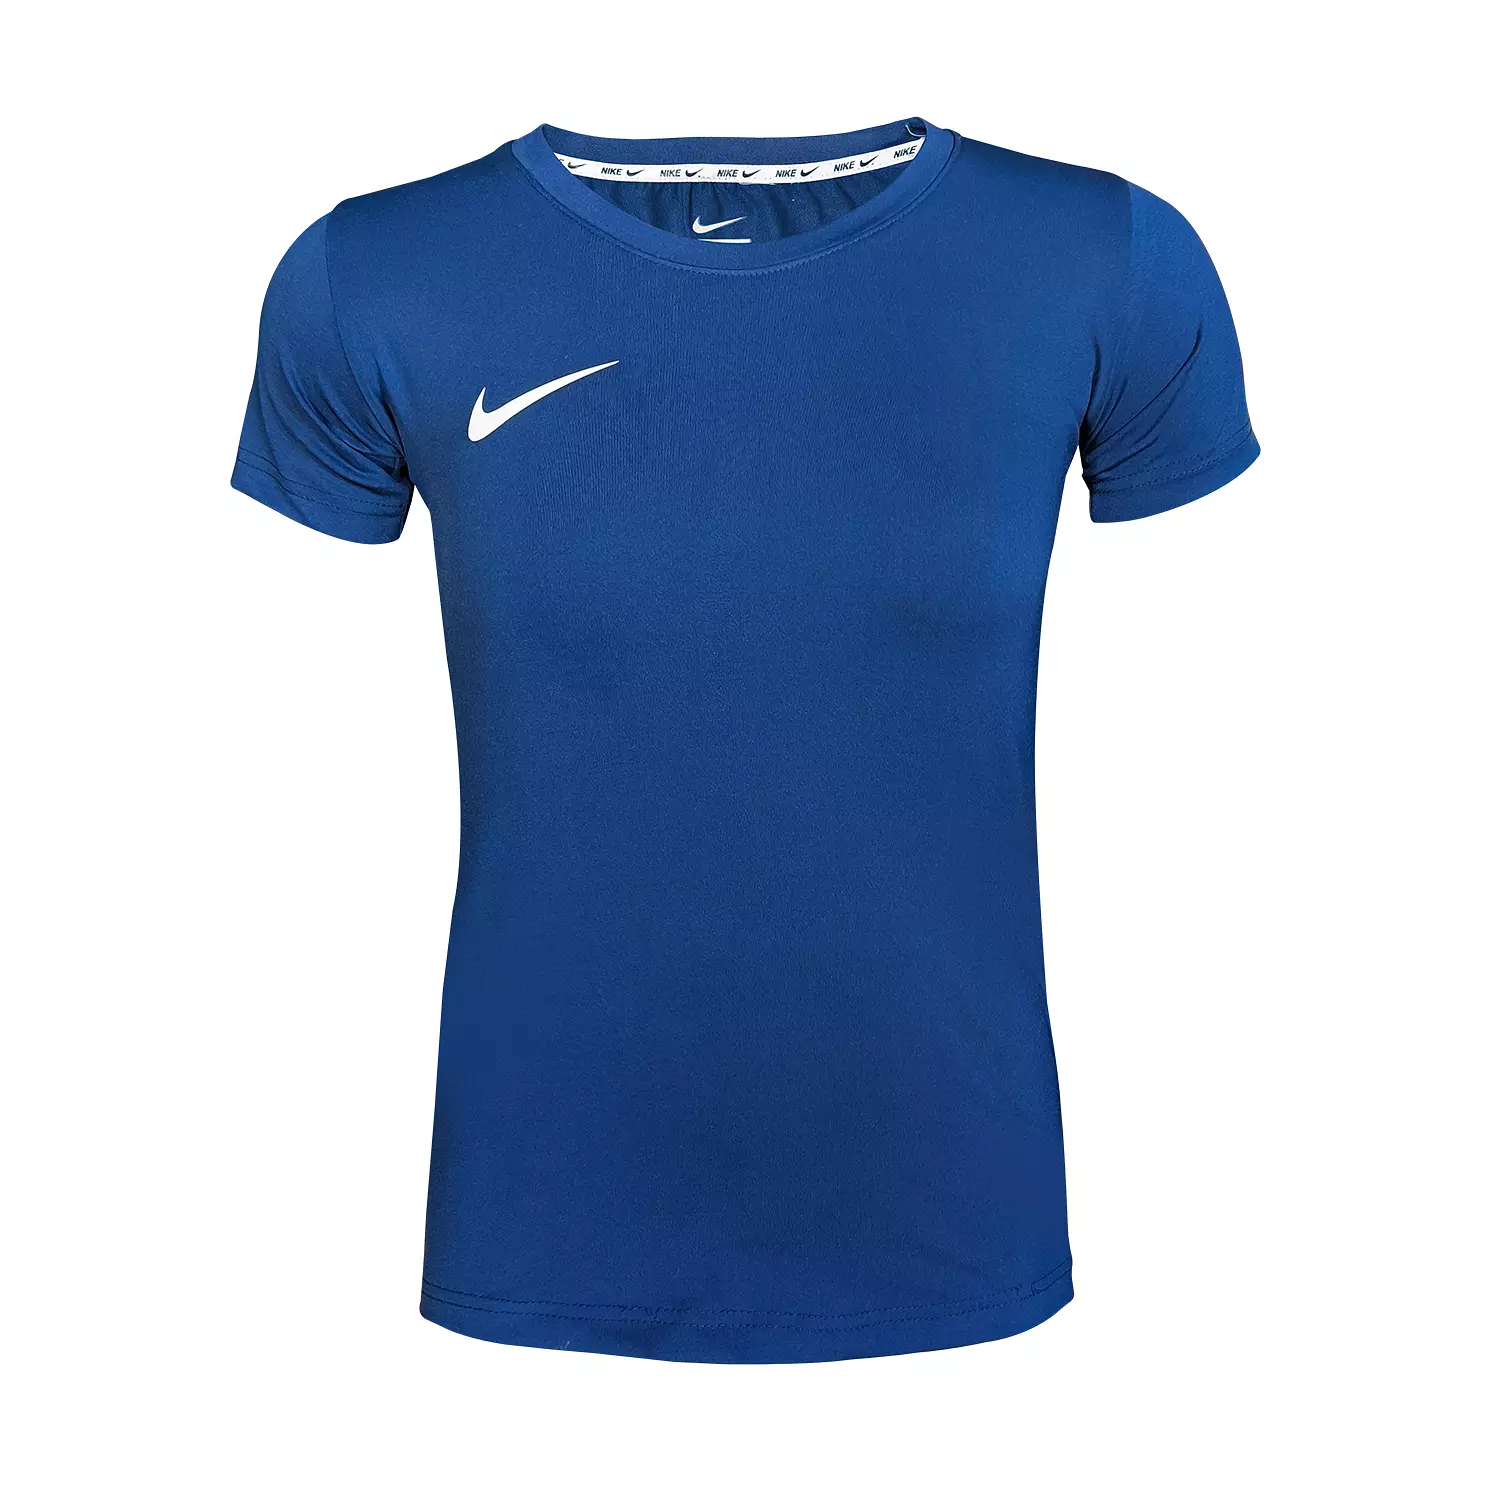 NIKE SPORTS T-SHIRT - LADIES hover image